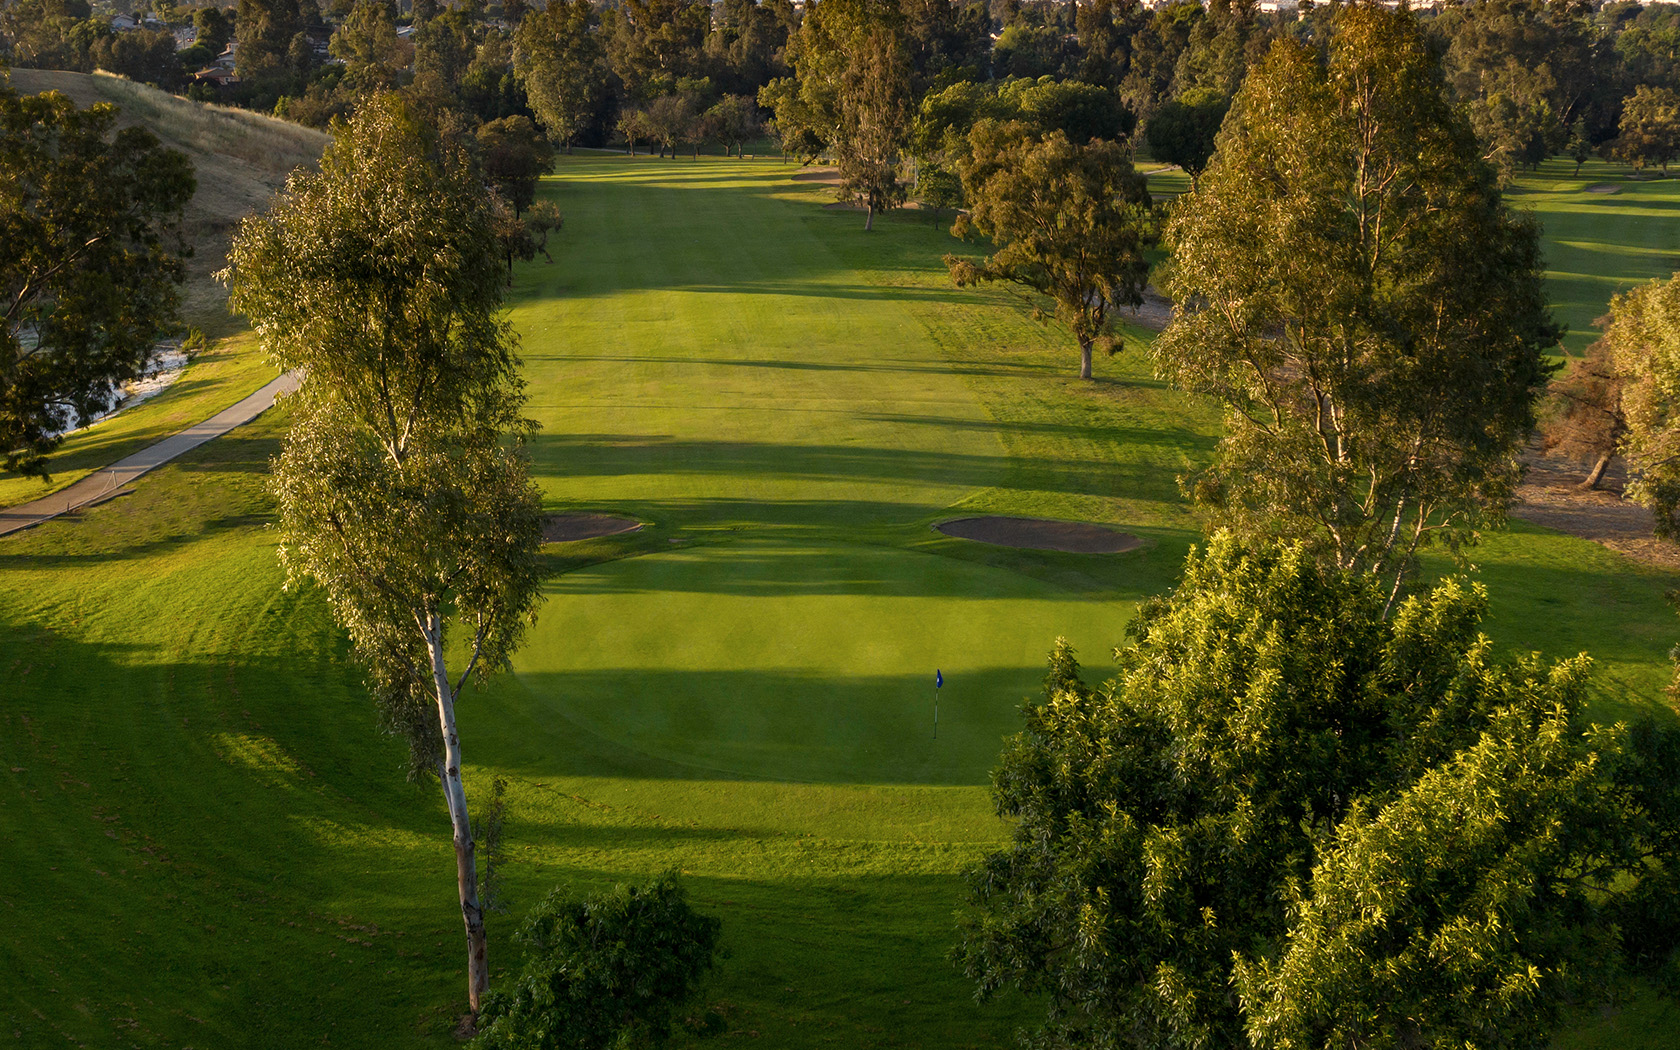 aerial view of the golf course with the shadows from the trees cast on it as the sun is setting to the left